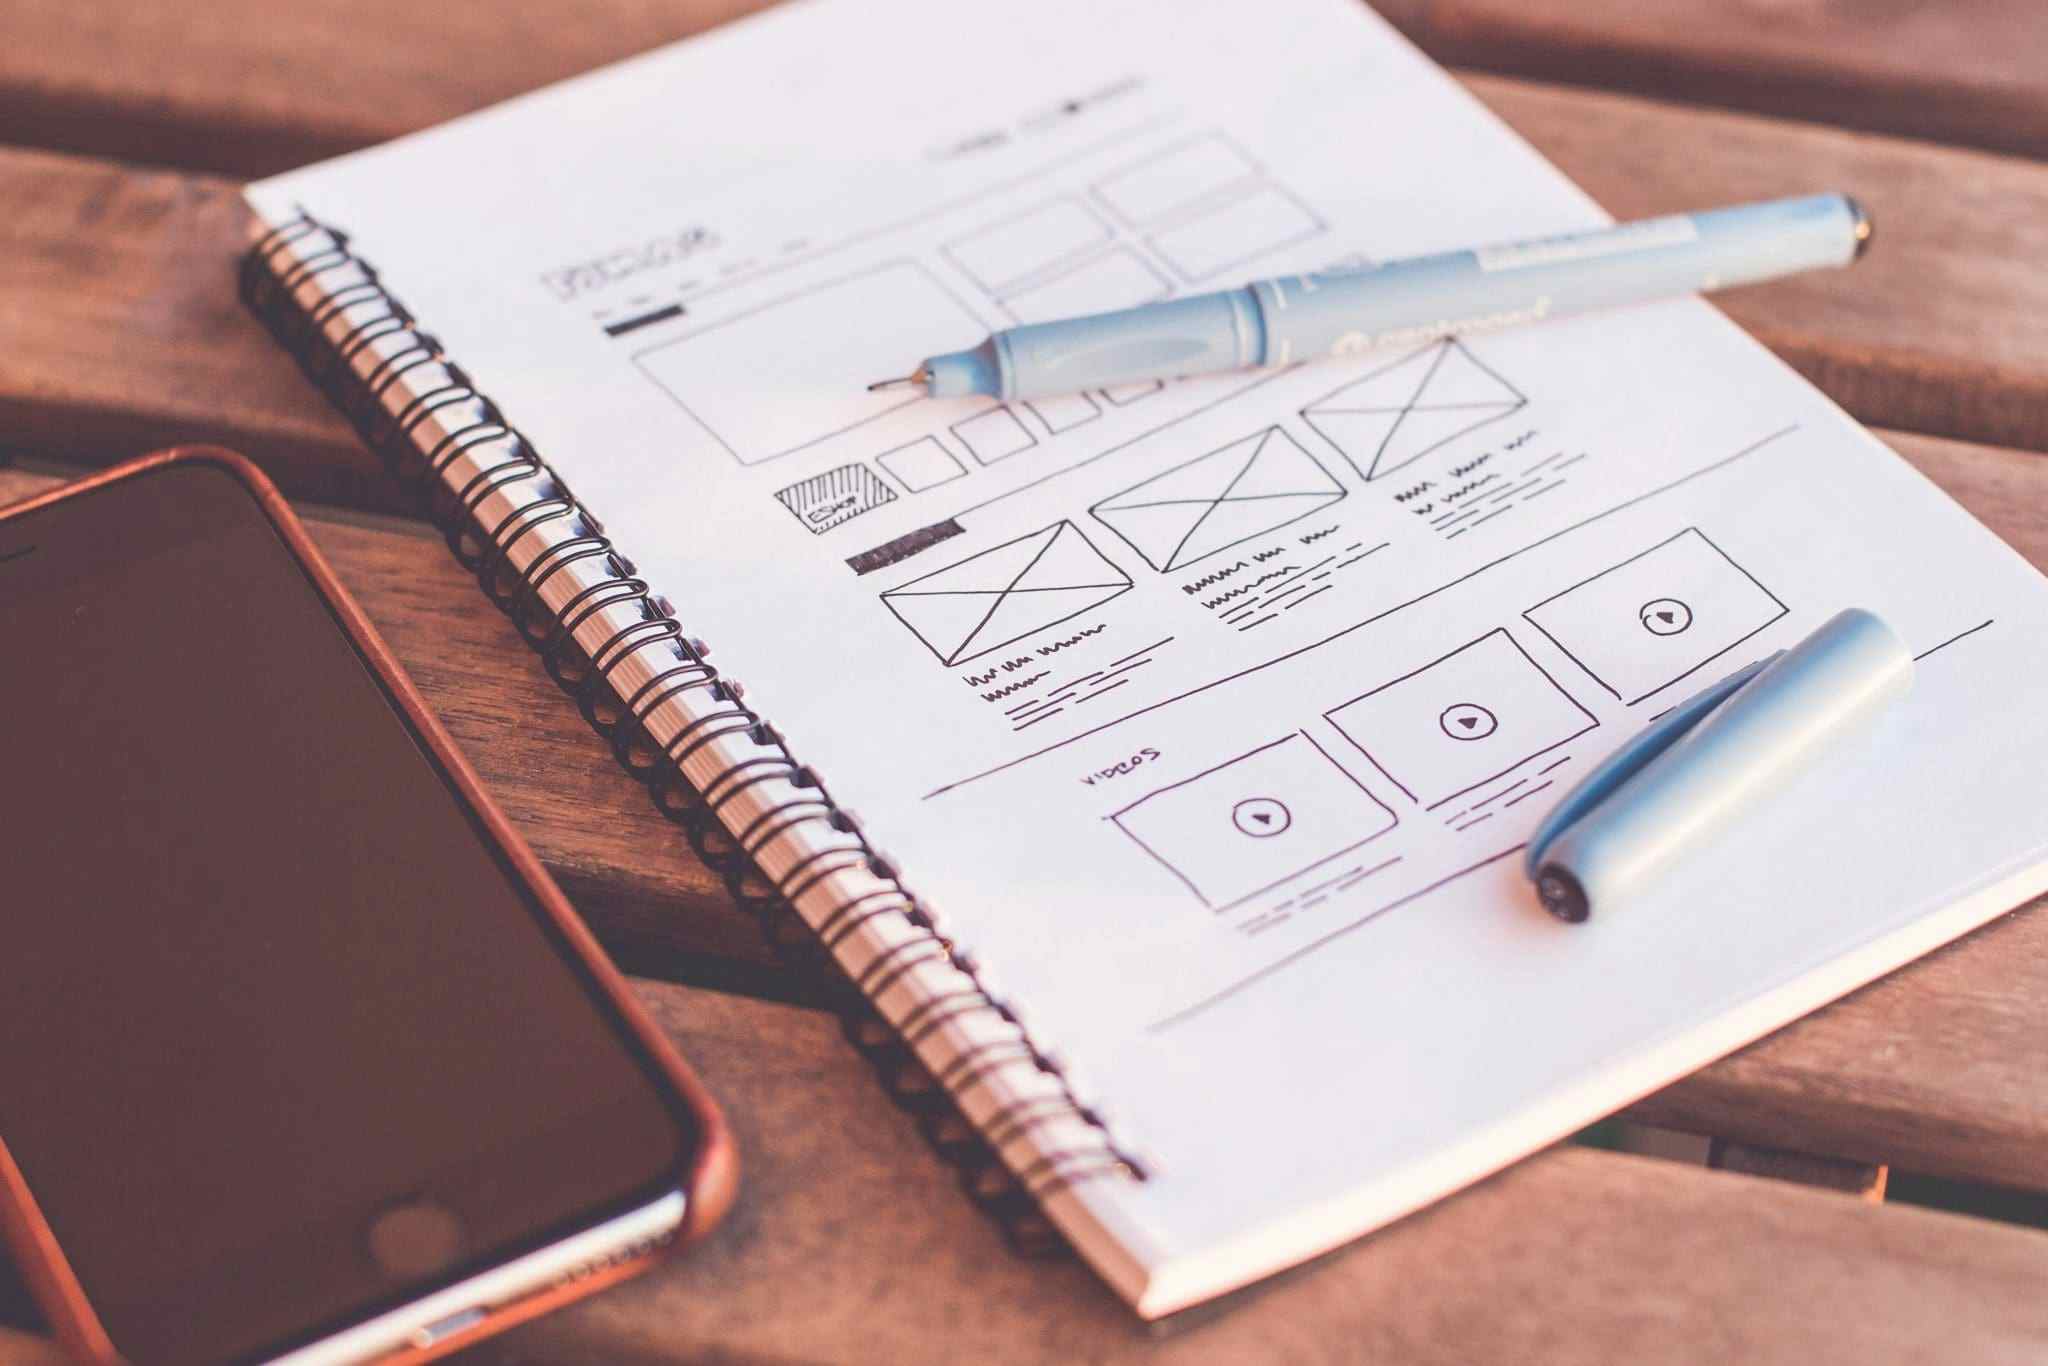 Wireframes and why do we need them (simplified)